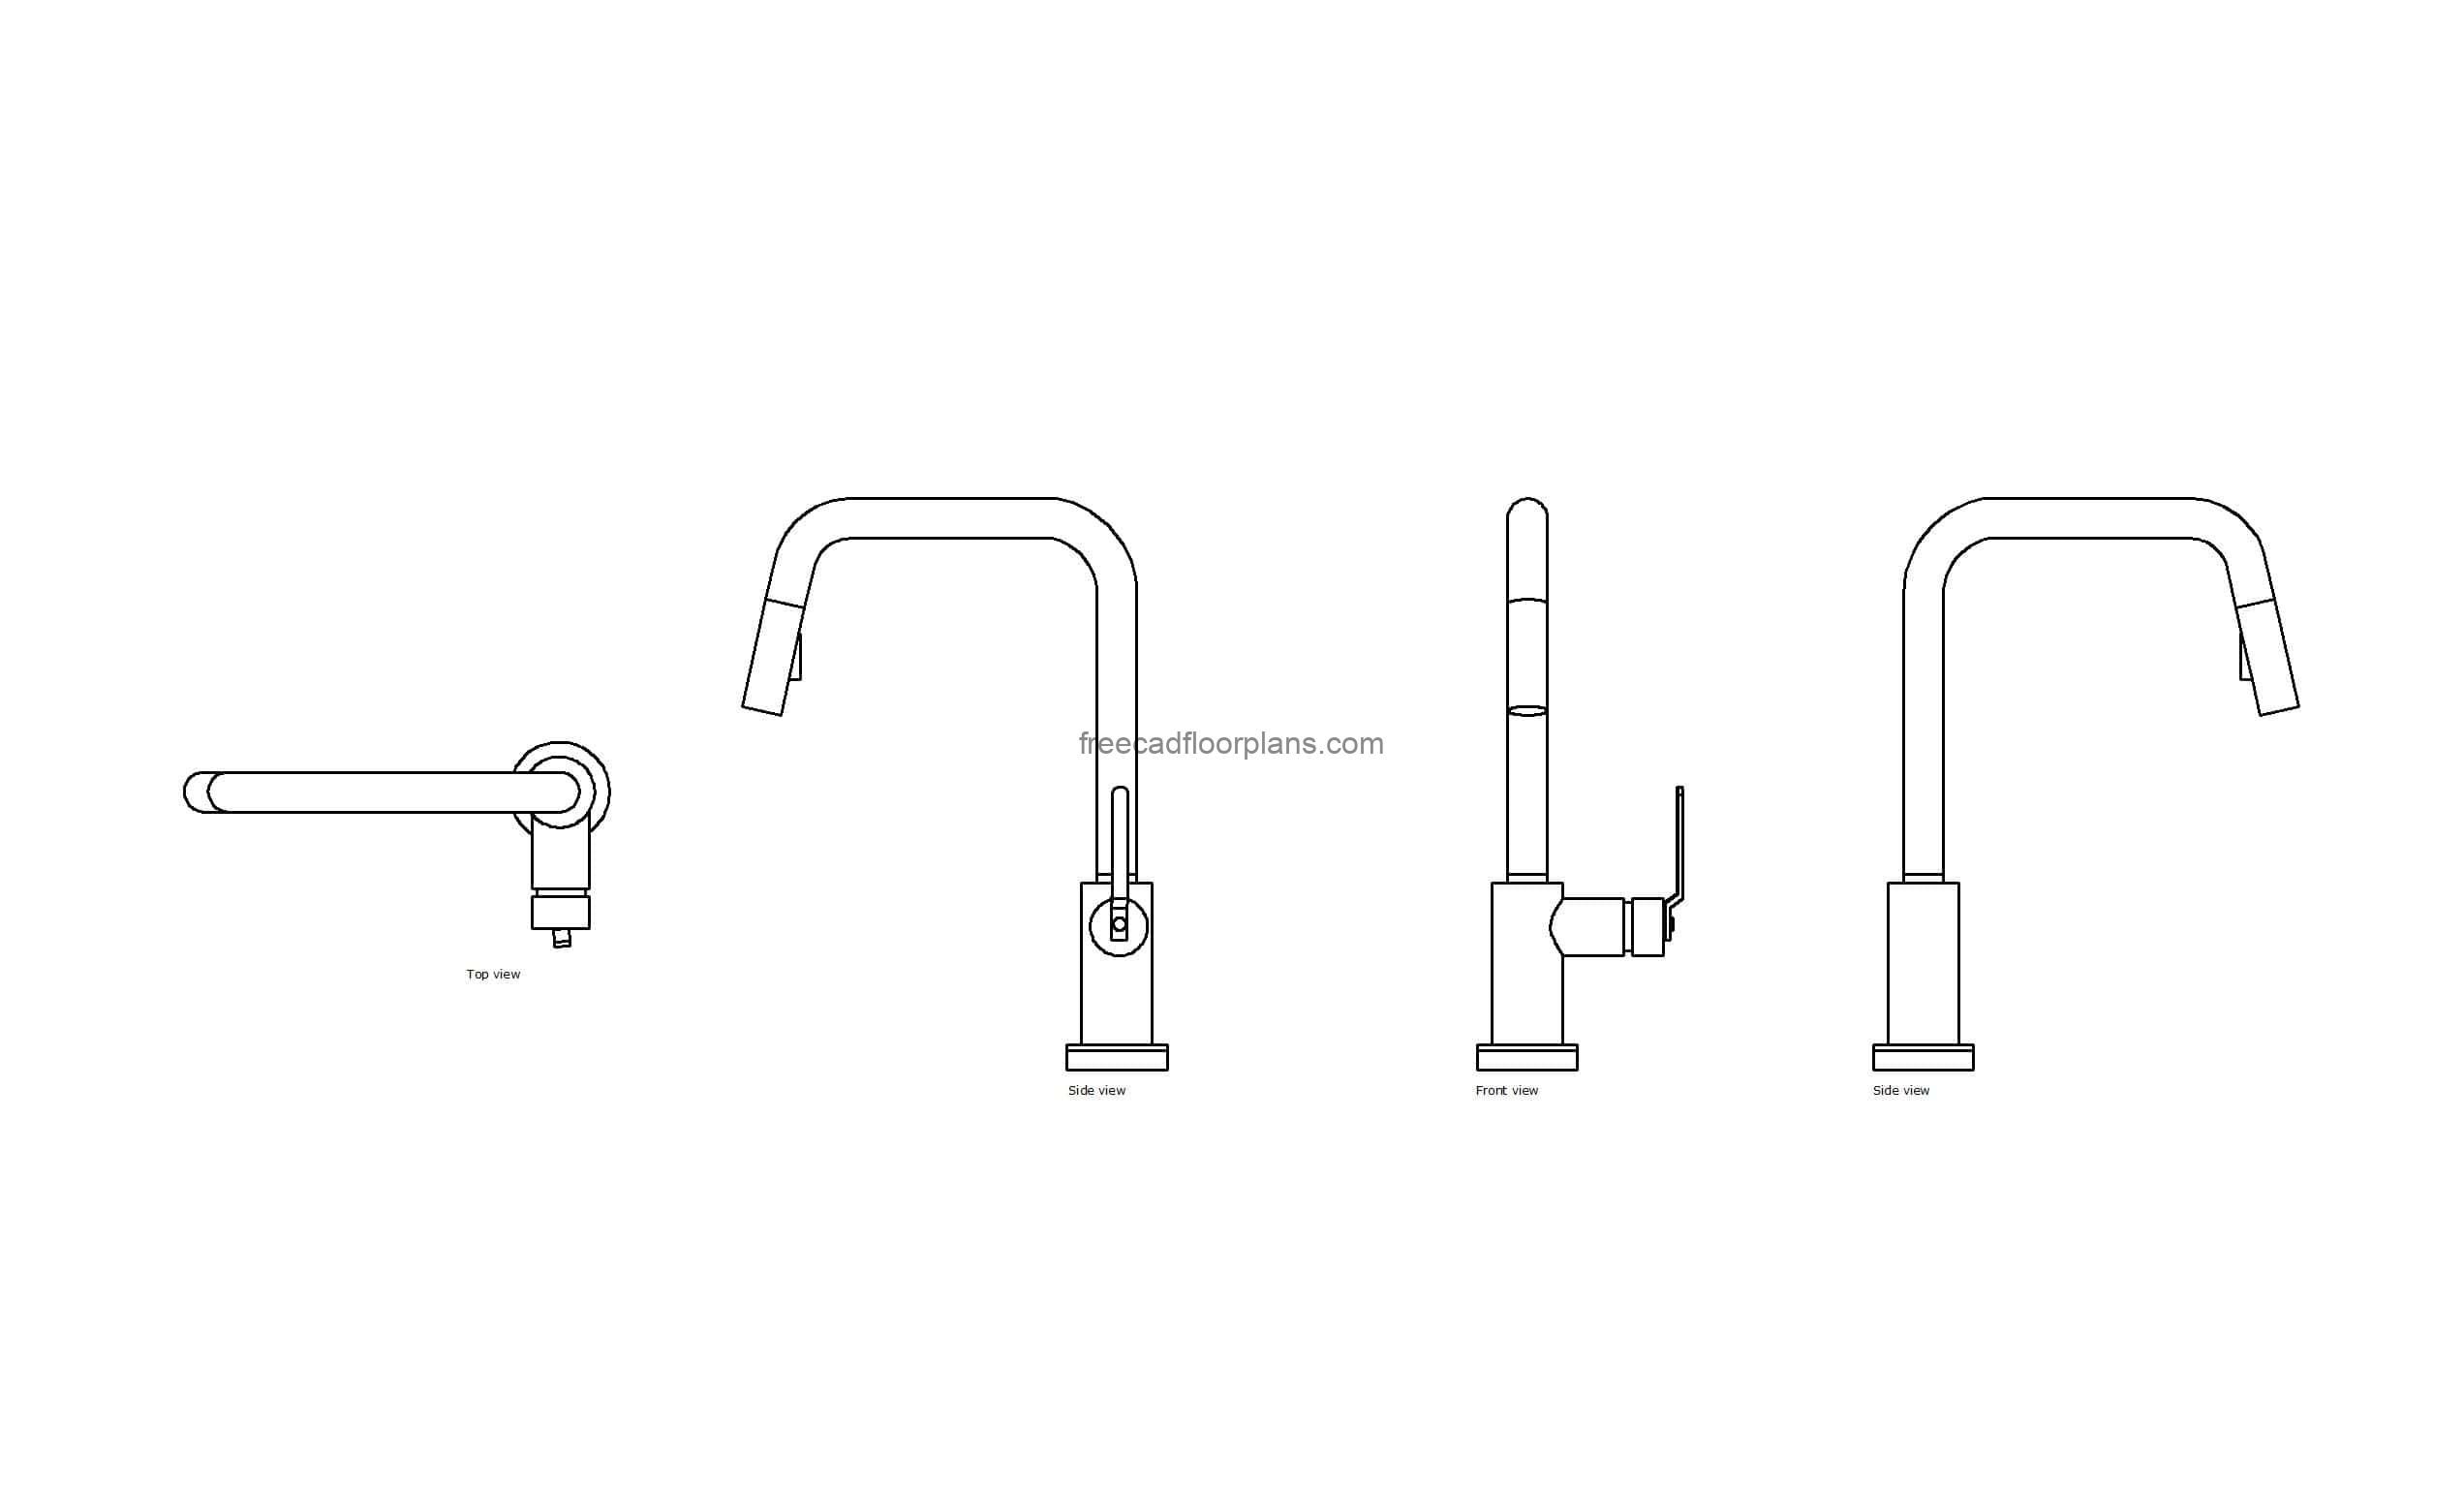 autocad drawing of a britzo litze kitchen faucet, 2d plan and elevation views, dwg file free for download